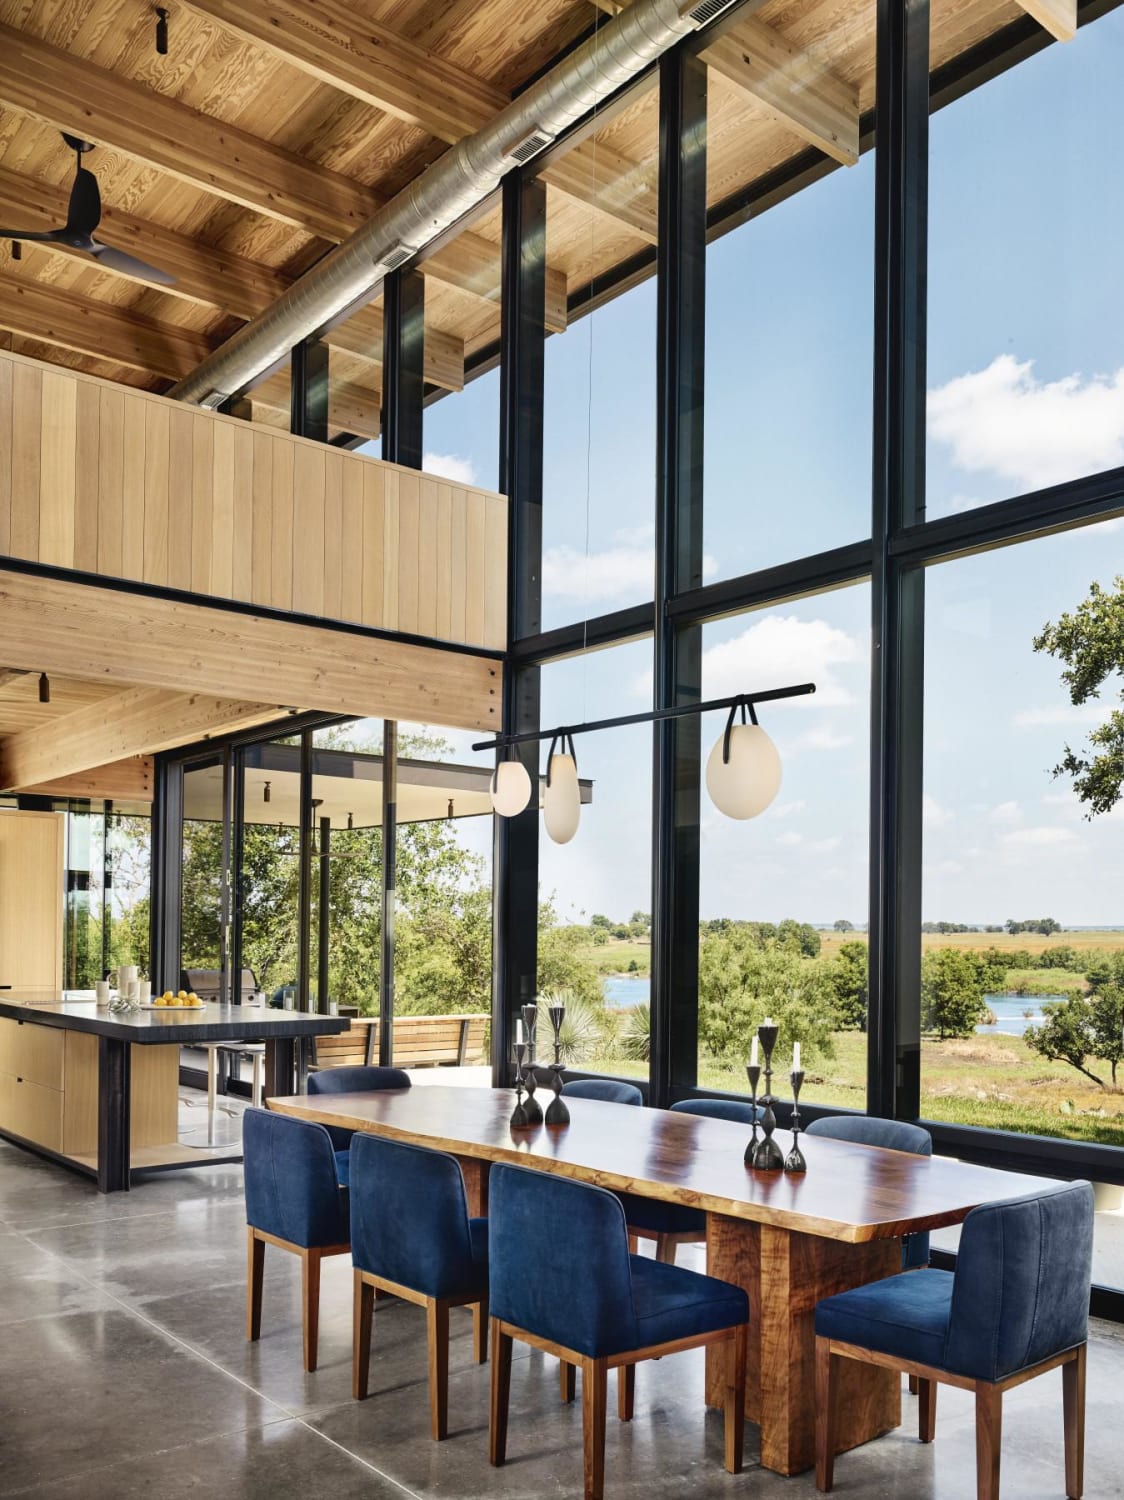 Dining area with double-height Douglas fir ceiling opening up to views of the river, Mason, Texas by Michael Hsu Office of Architecture (Photo: Casey Dunn)